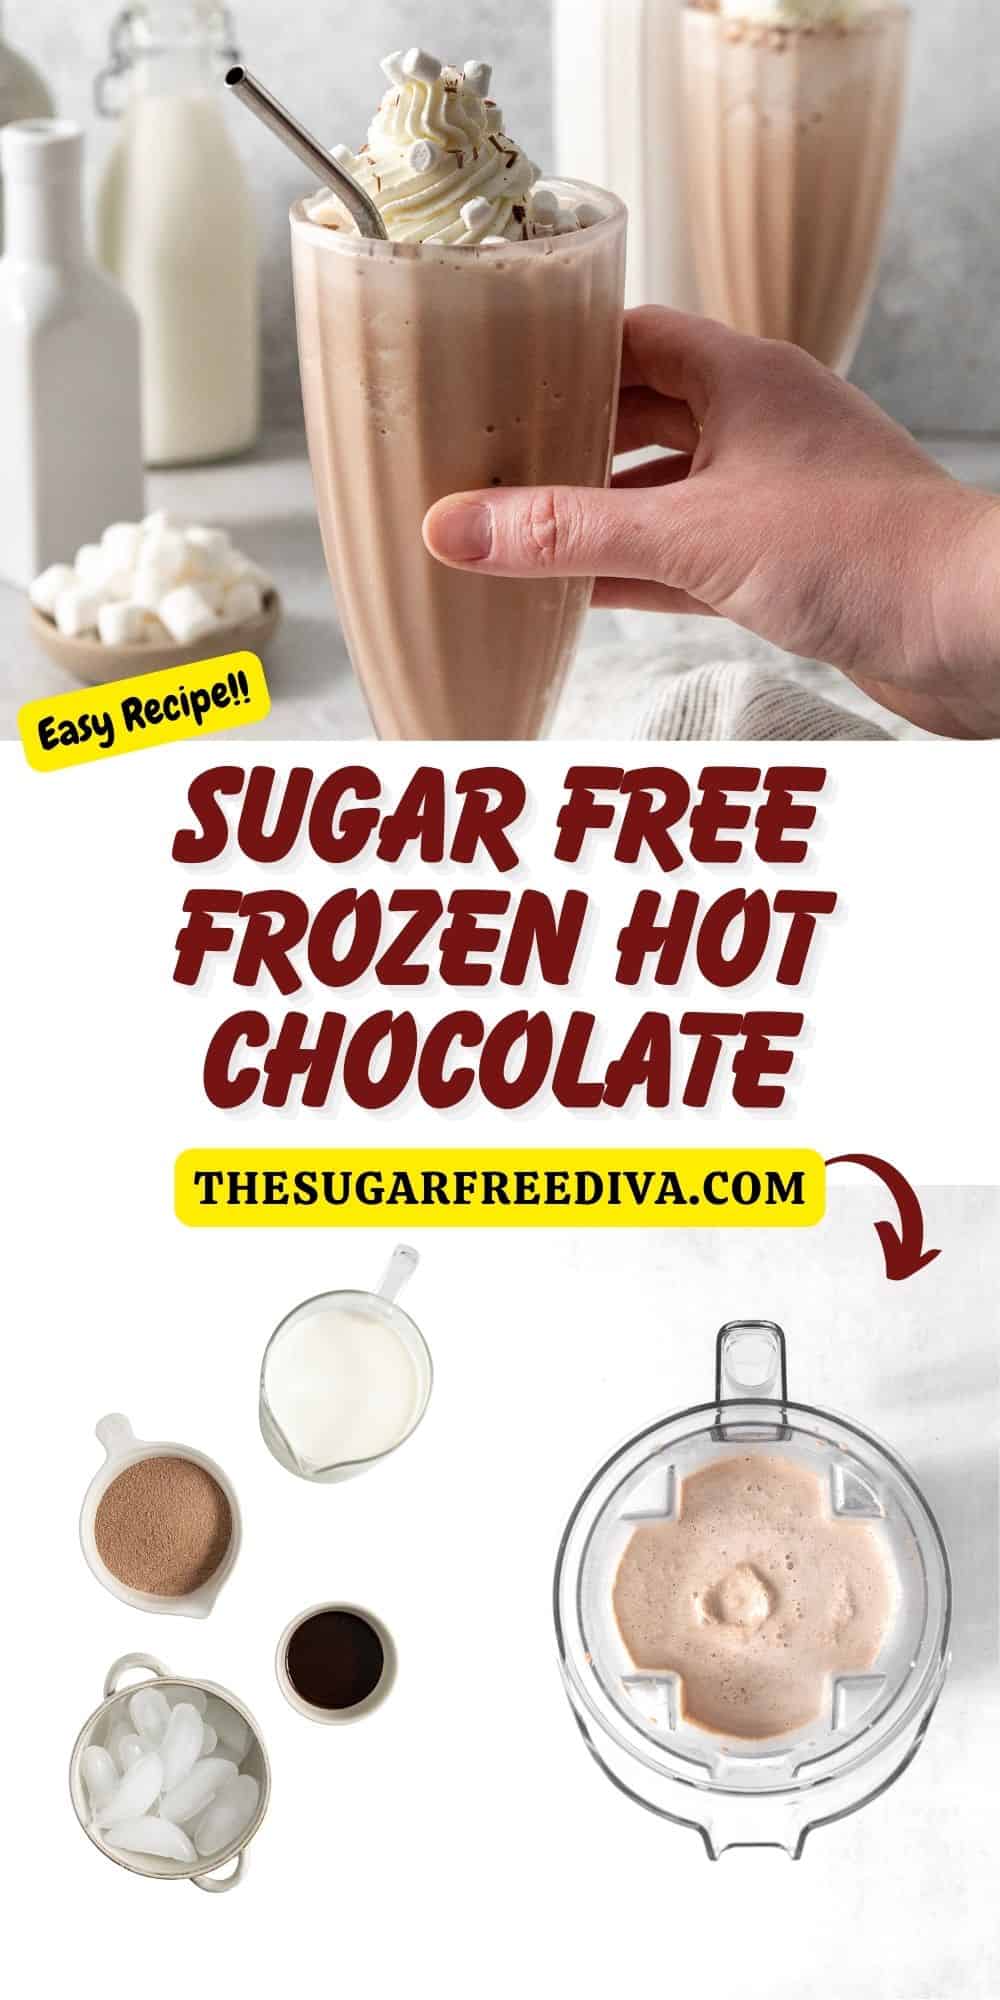 Sugar Free Frozen Hot Chocolate, a simple and delicious beverage recipe for a chocolatey cold drink or dessert made with  no added sugar